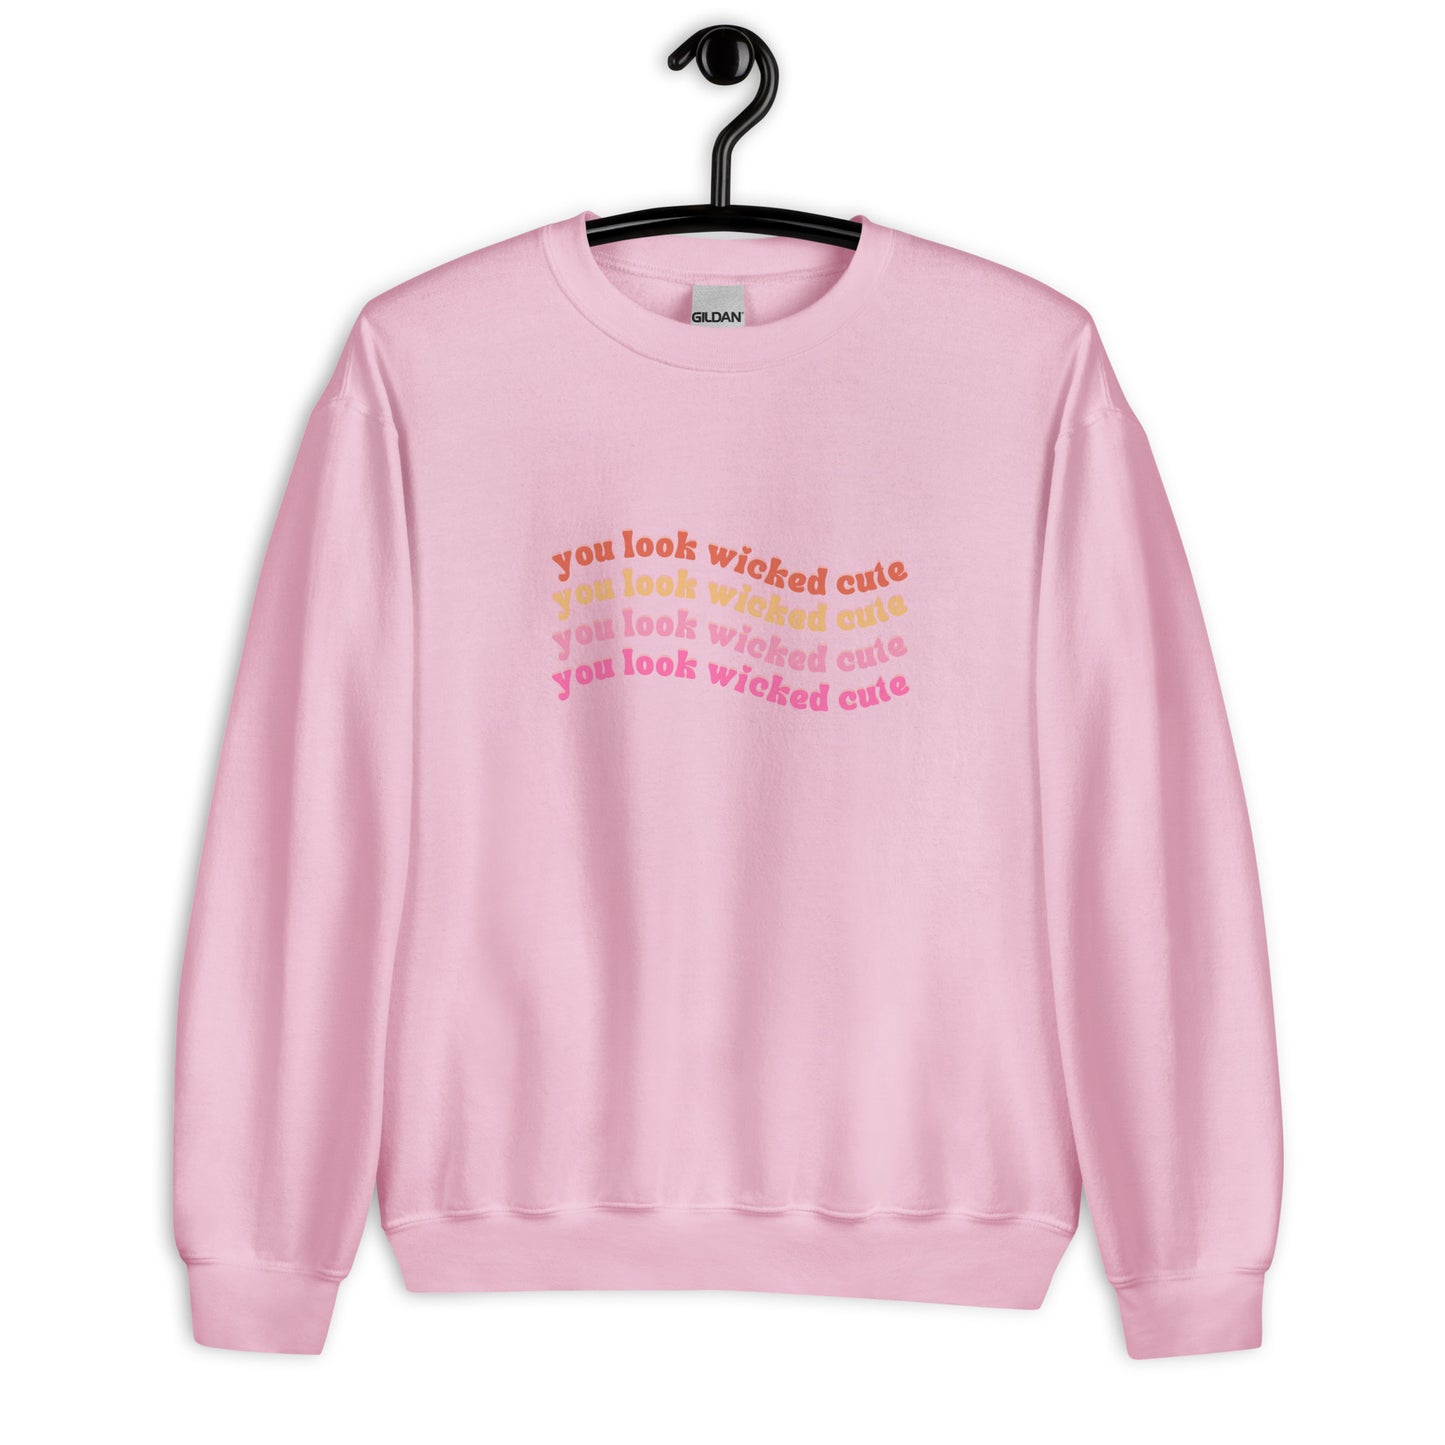 pink hoodie that says "you look wicked cute in red orange and pink lettering